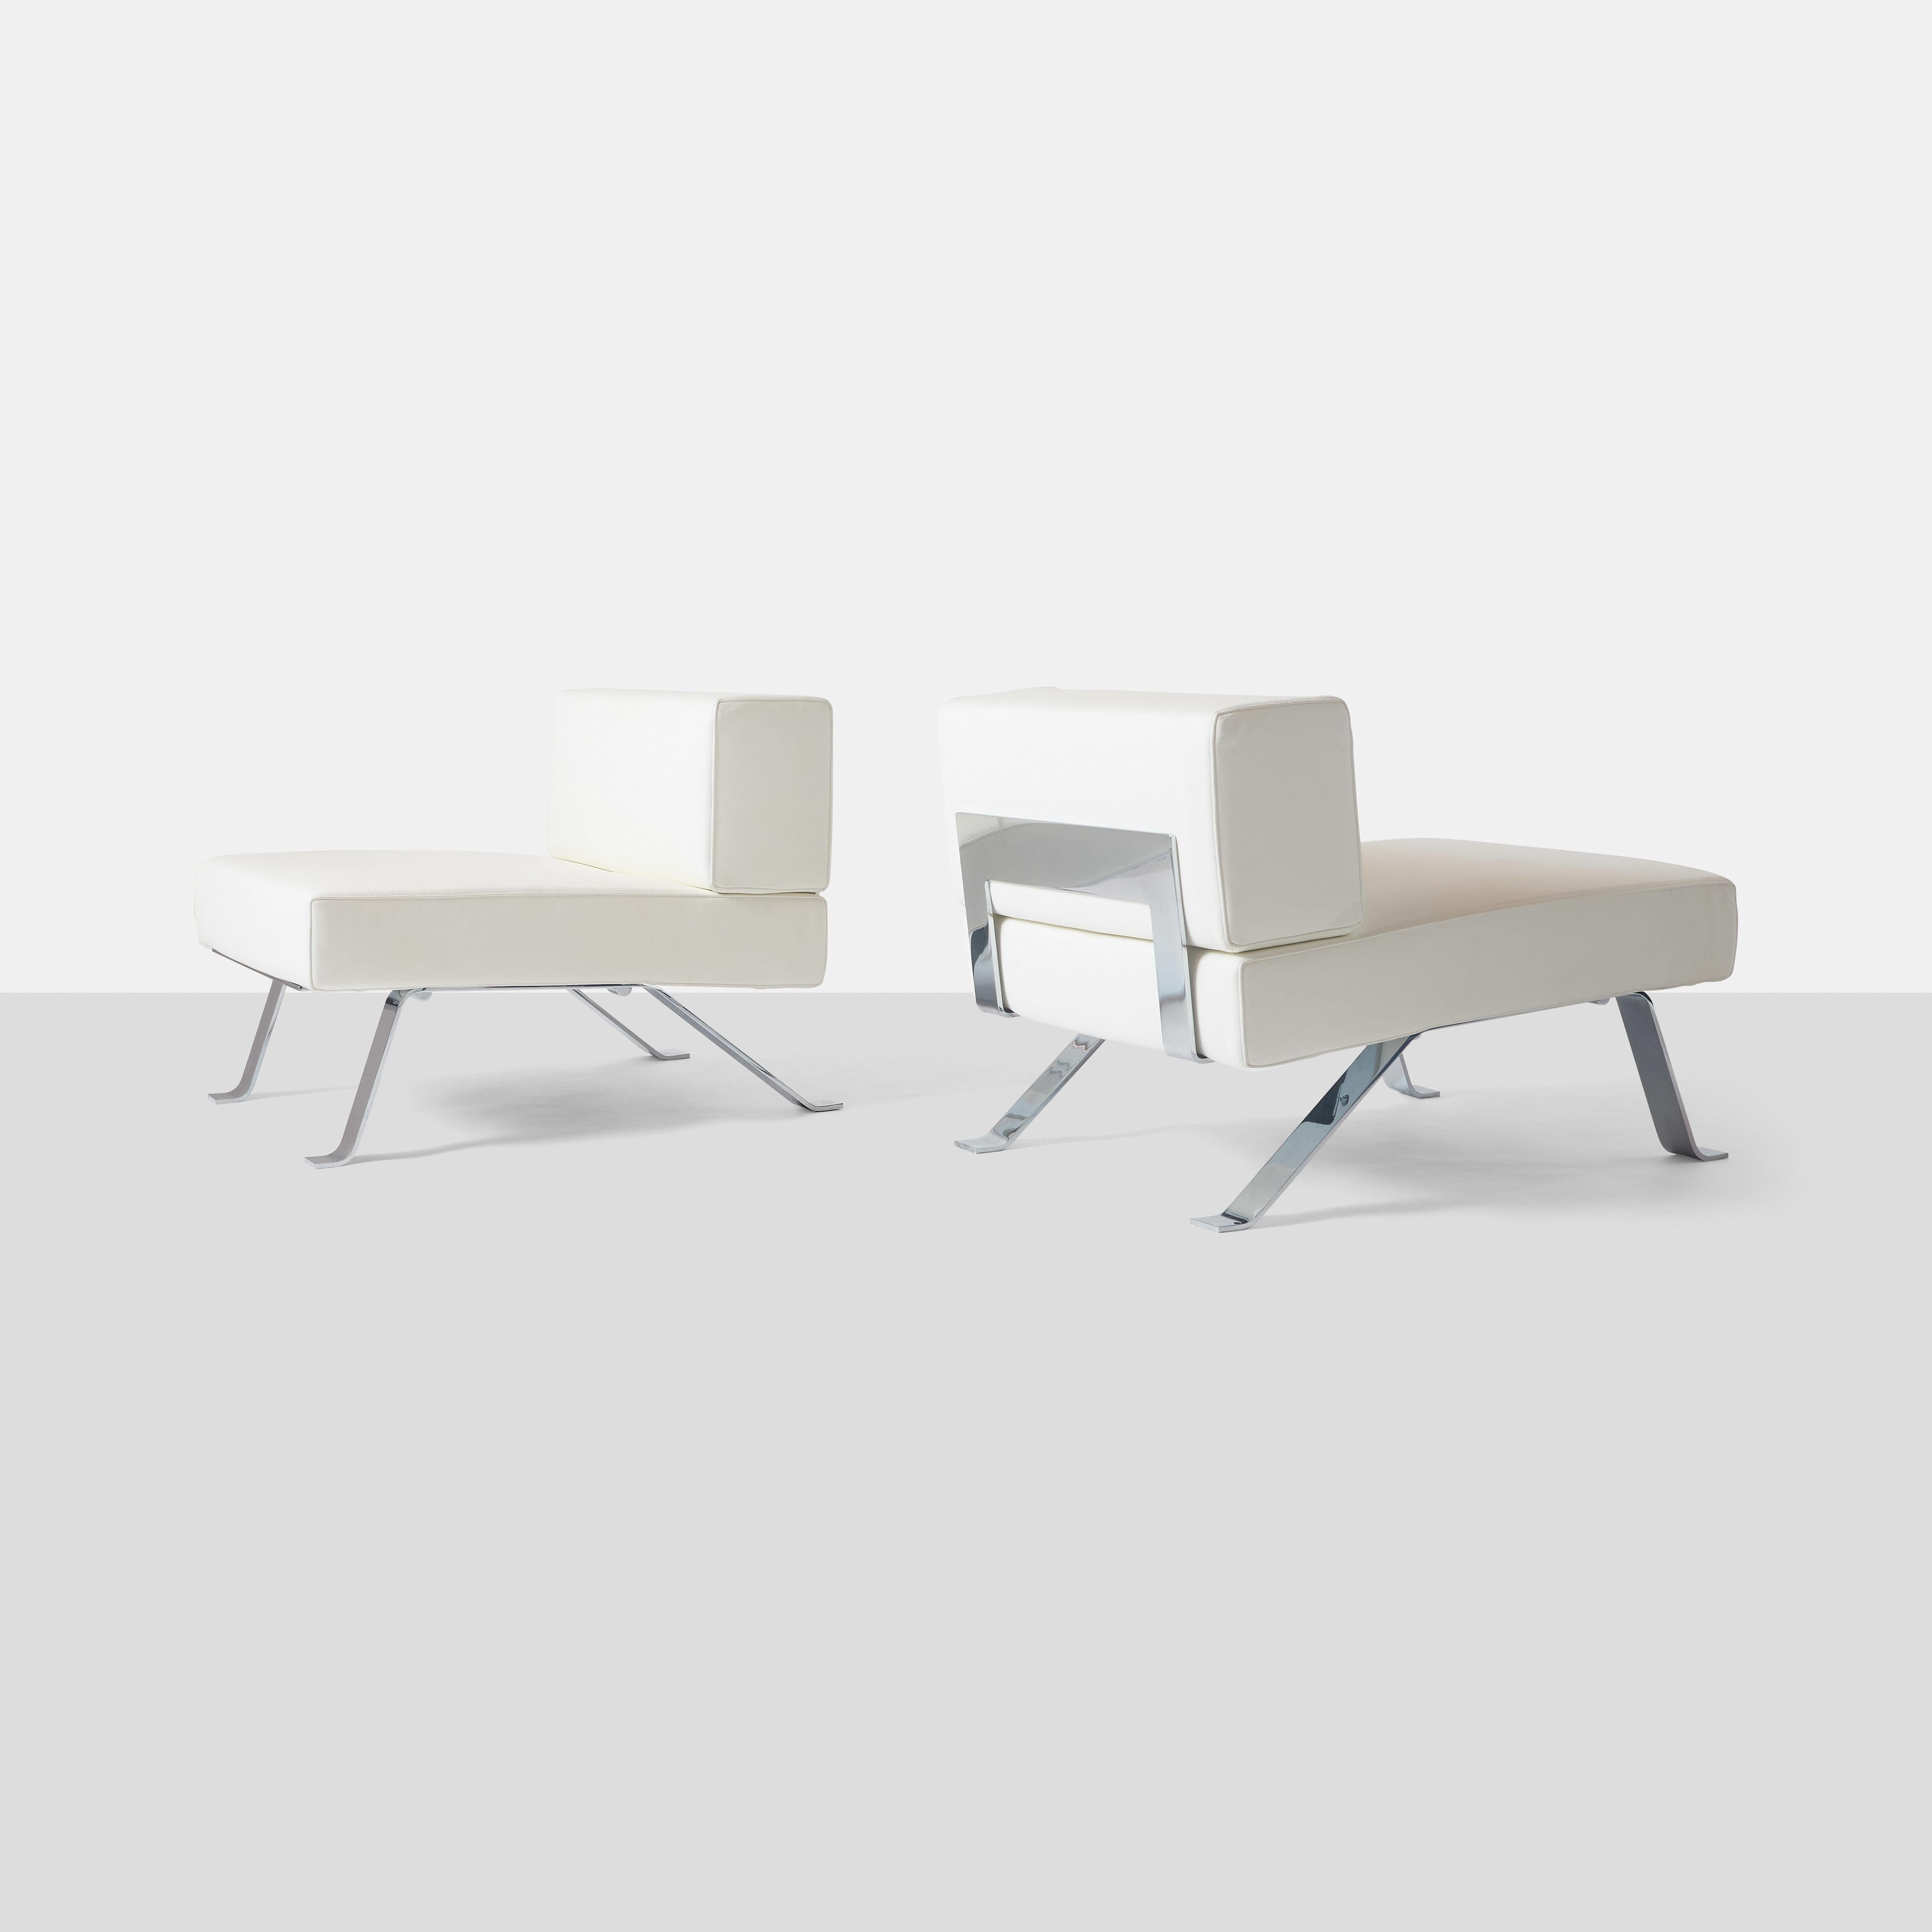 A pair of 512 Ombra lounge chairs by Charlotte Perriand for Cassina with chromed steel frames and white leather upholstery. 
Marked Charlotte Perriand Cassina Made in Italy on bottom.